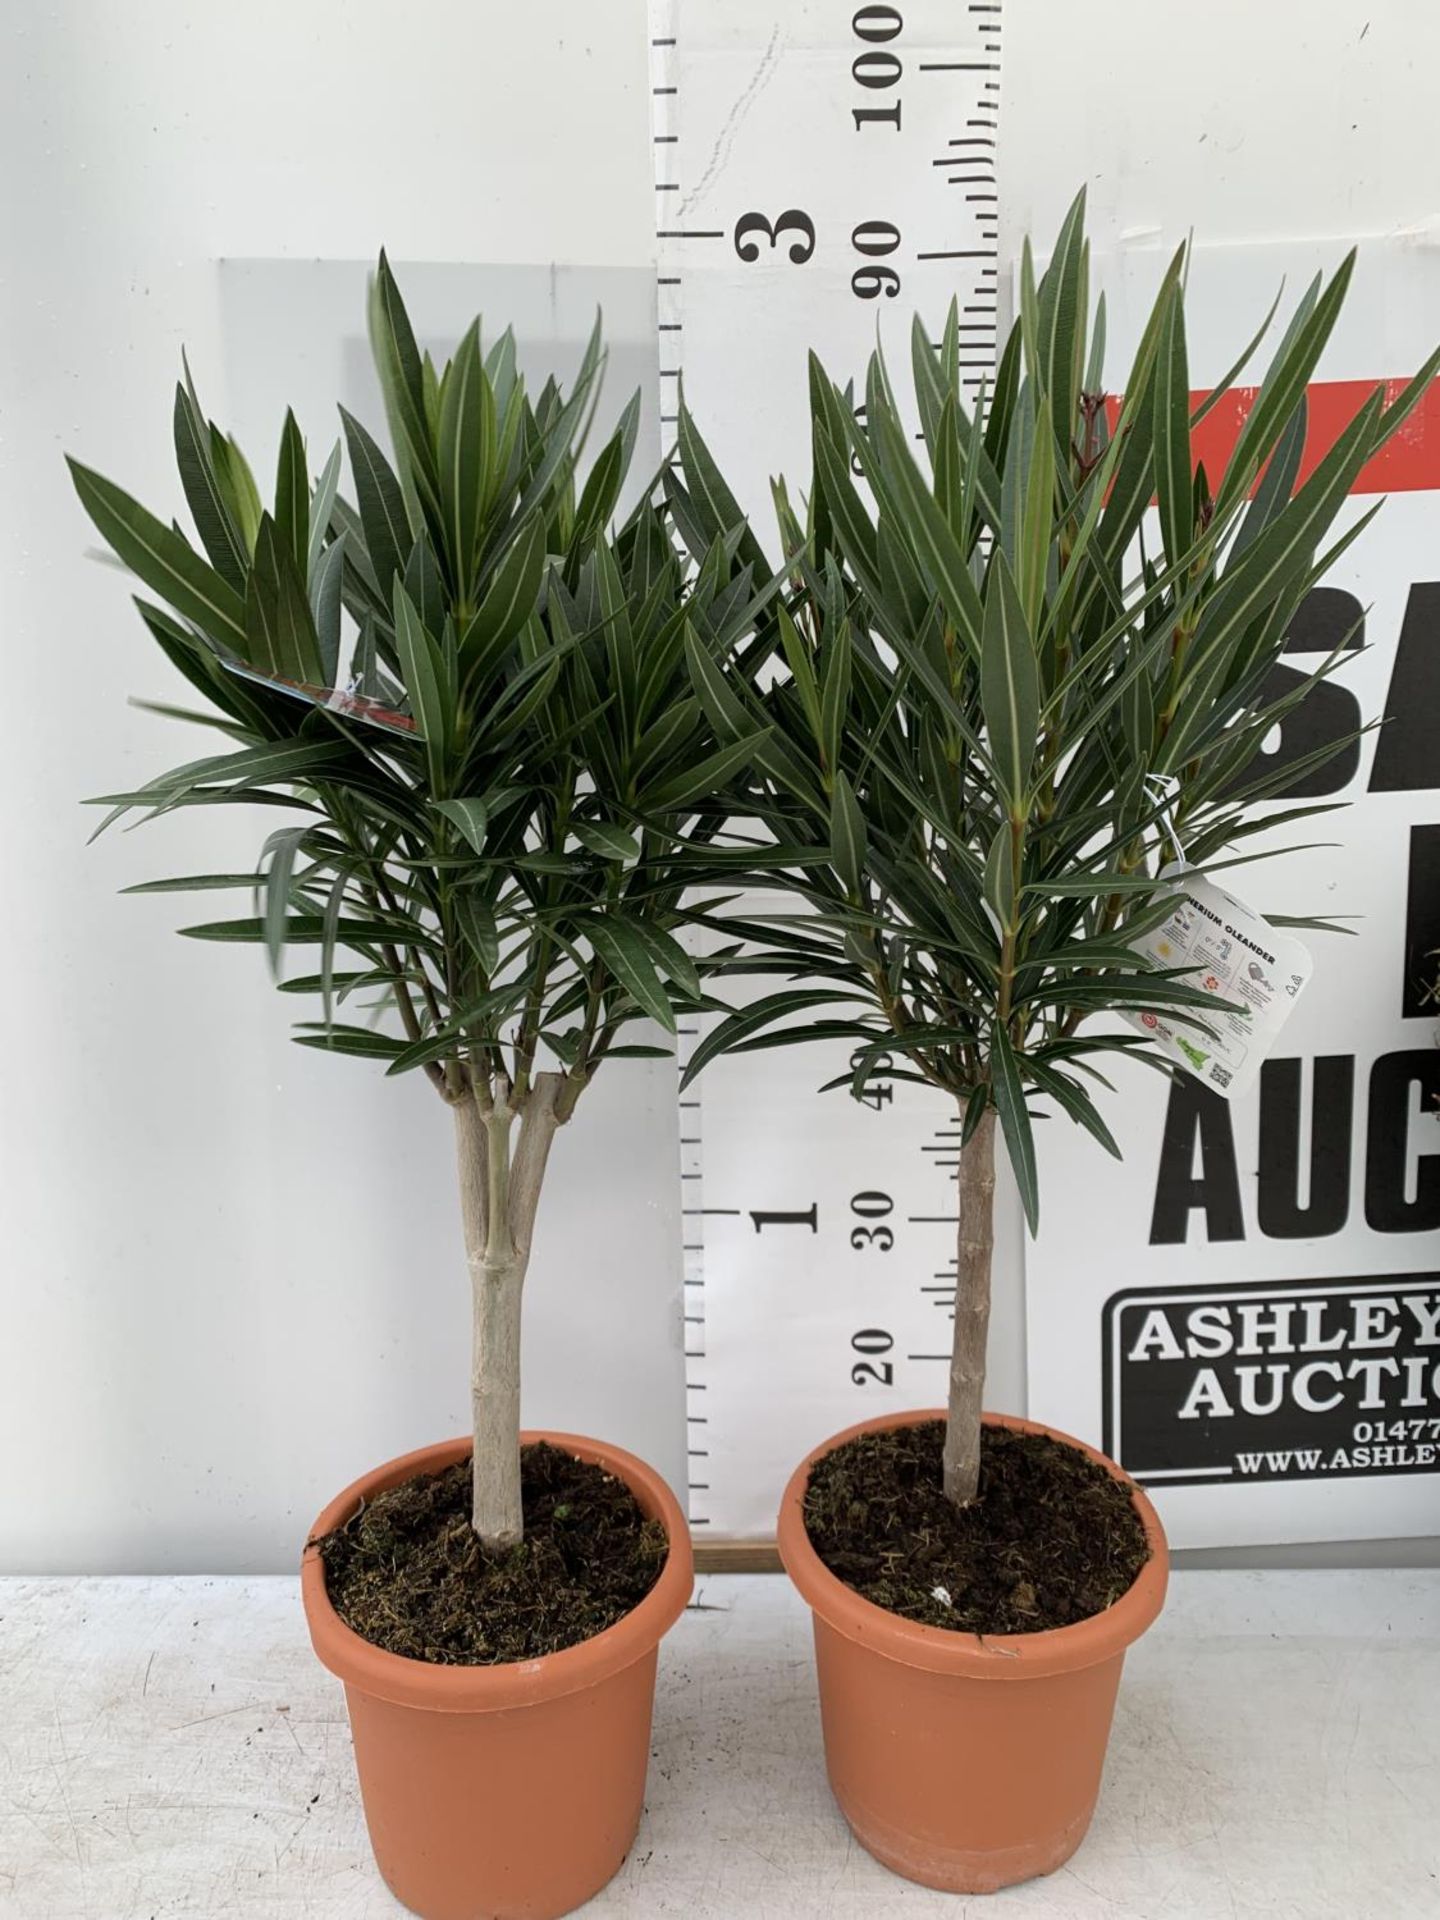 TWO OLEANDER STANDARD NERIUMS RED 'PAPA GAMBETTA' AND 'JANNOCH' IN 4 LTR POTS APPROX 90CM IN - Image 2 of 8